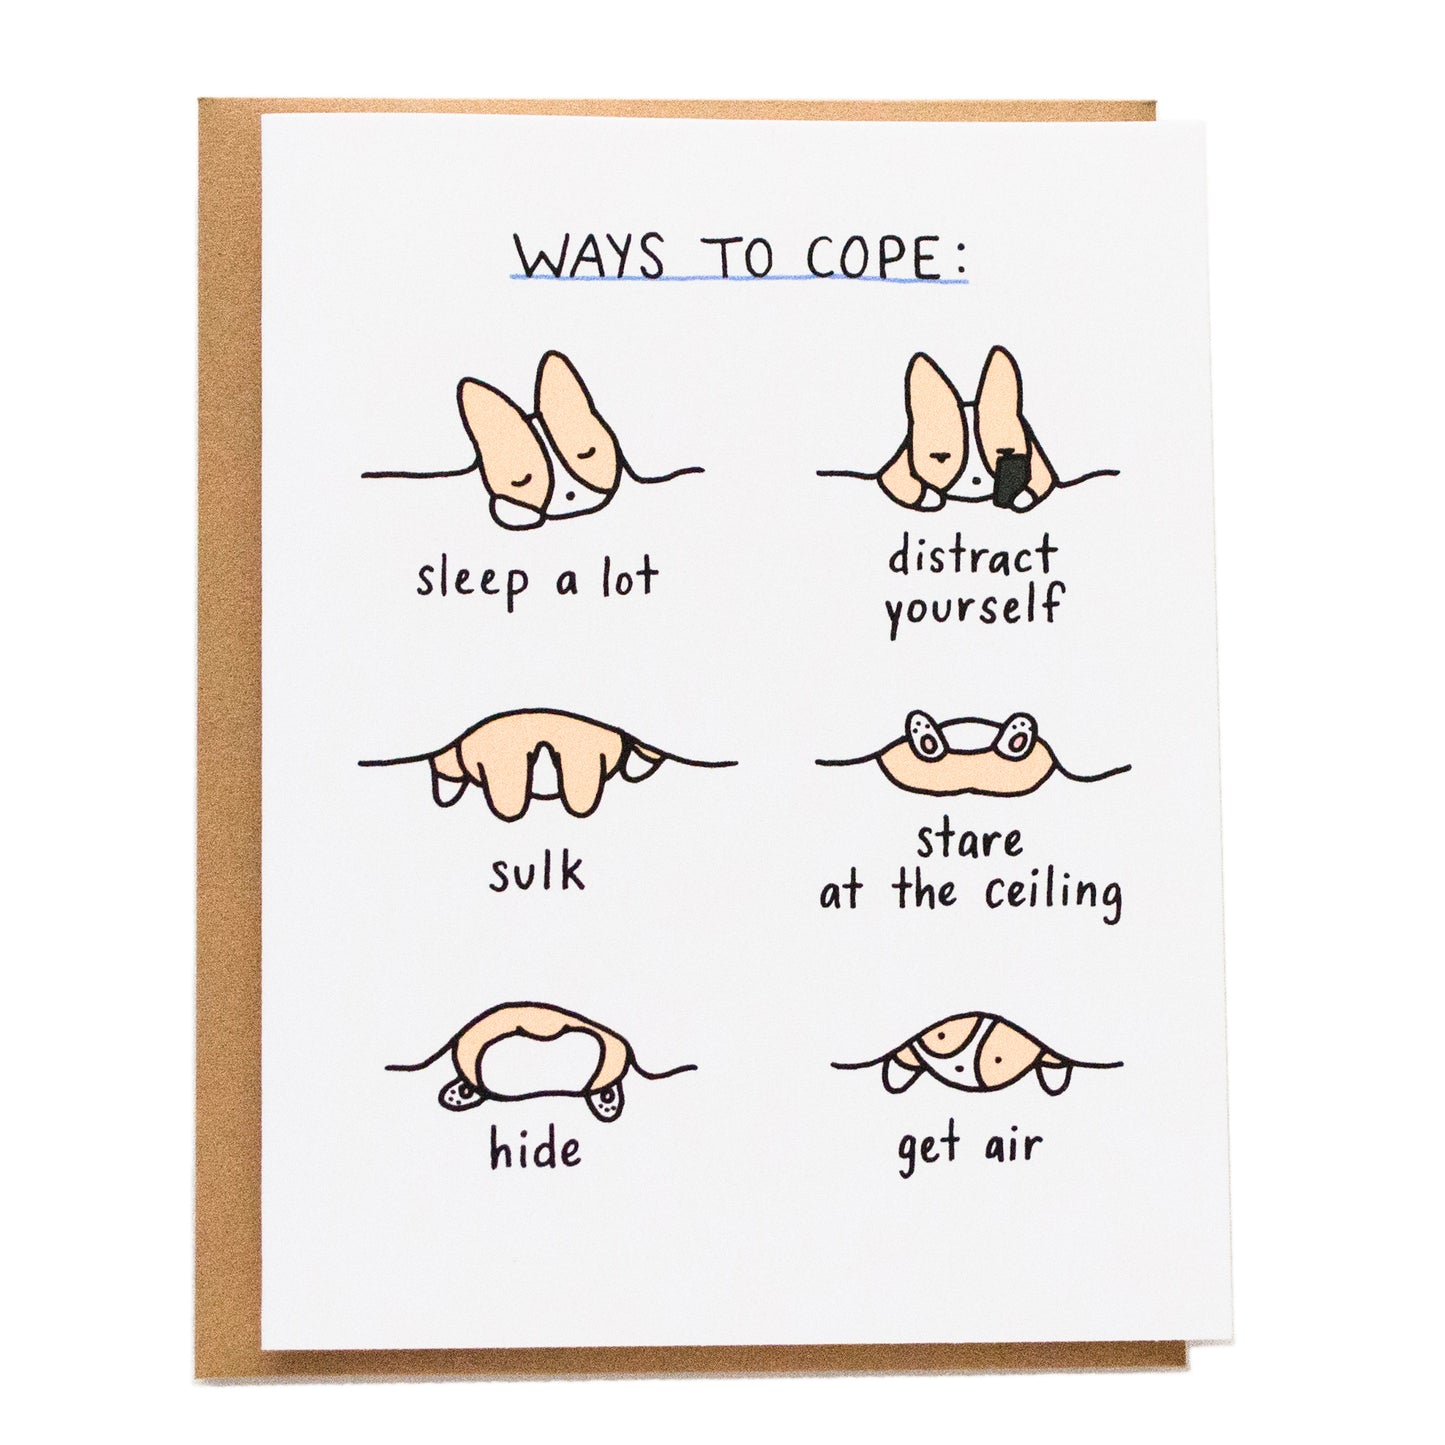 card is titled at the top, ways to cope, and a chart of corgi heads depicting suggestions: sleep a lot, distract yourself, sulk, stare at the ceiling, hide, get air